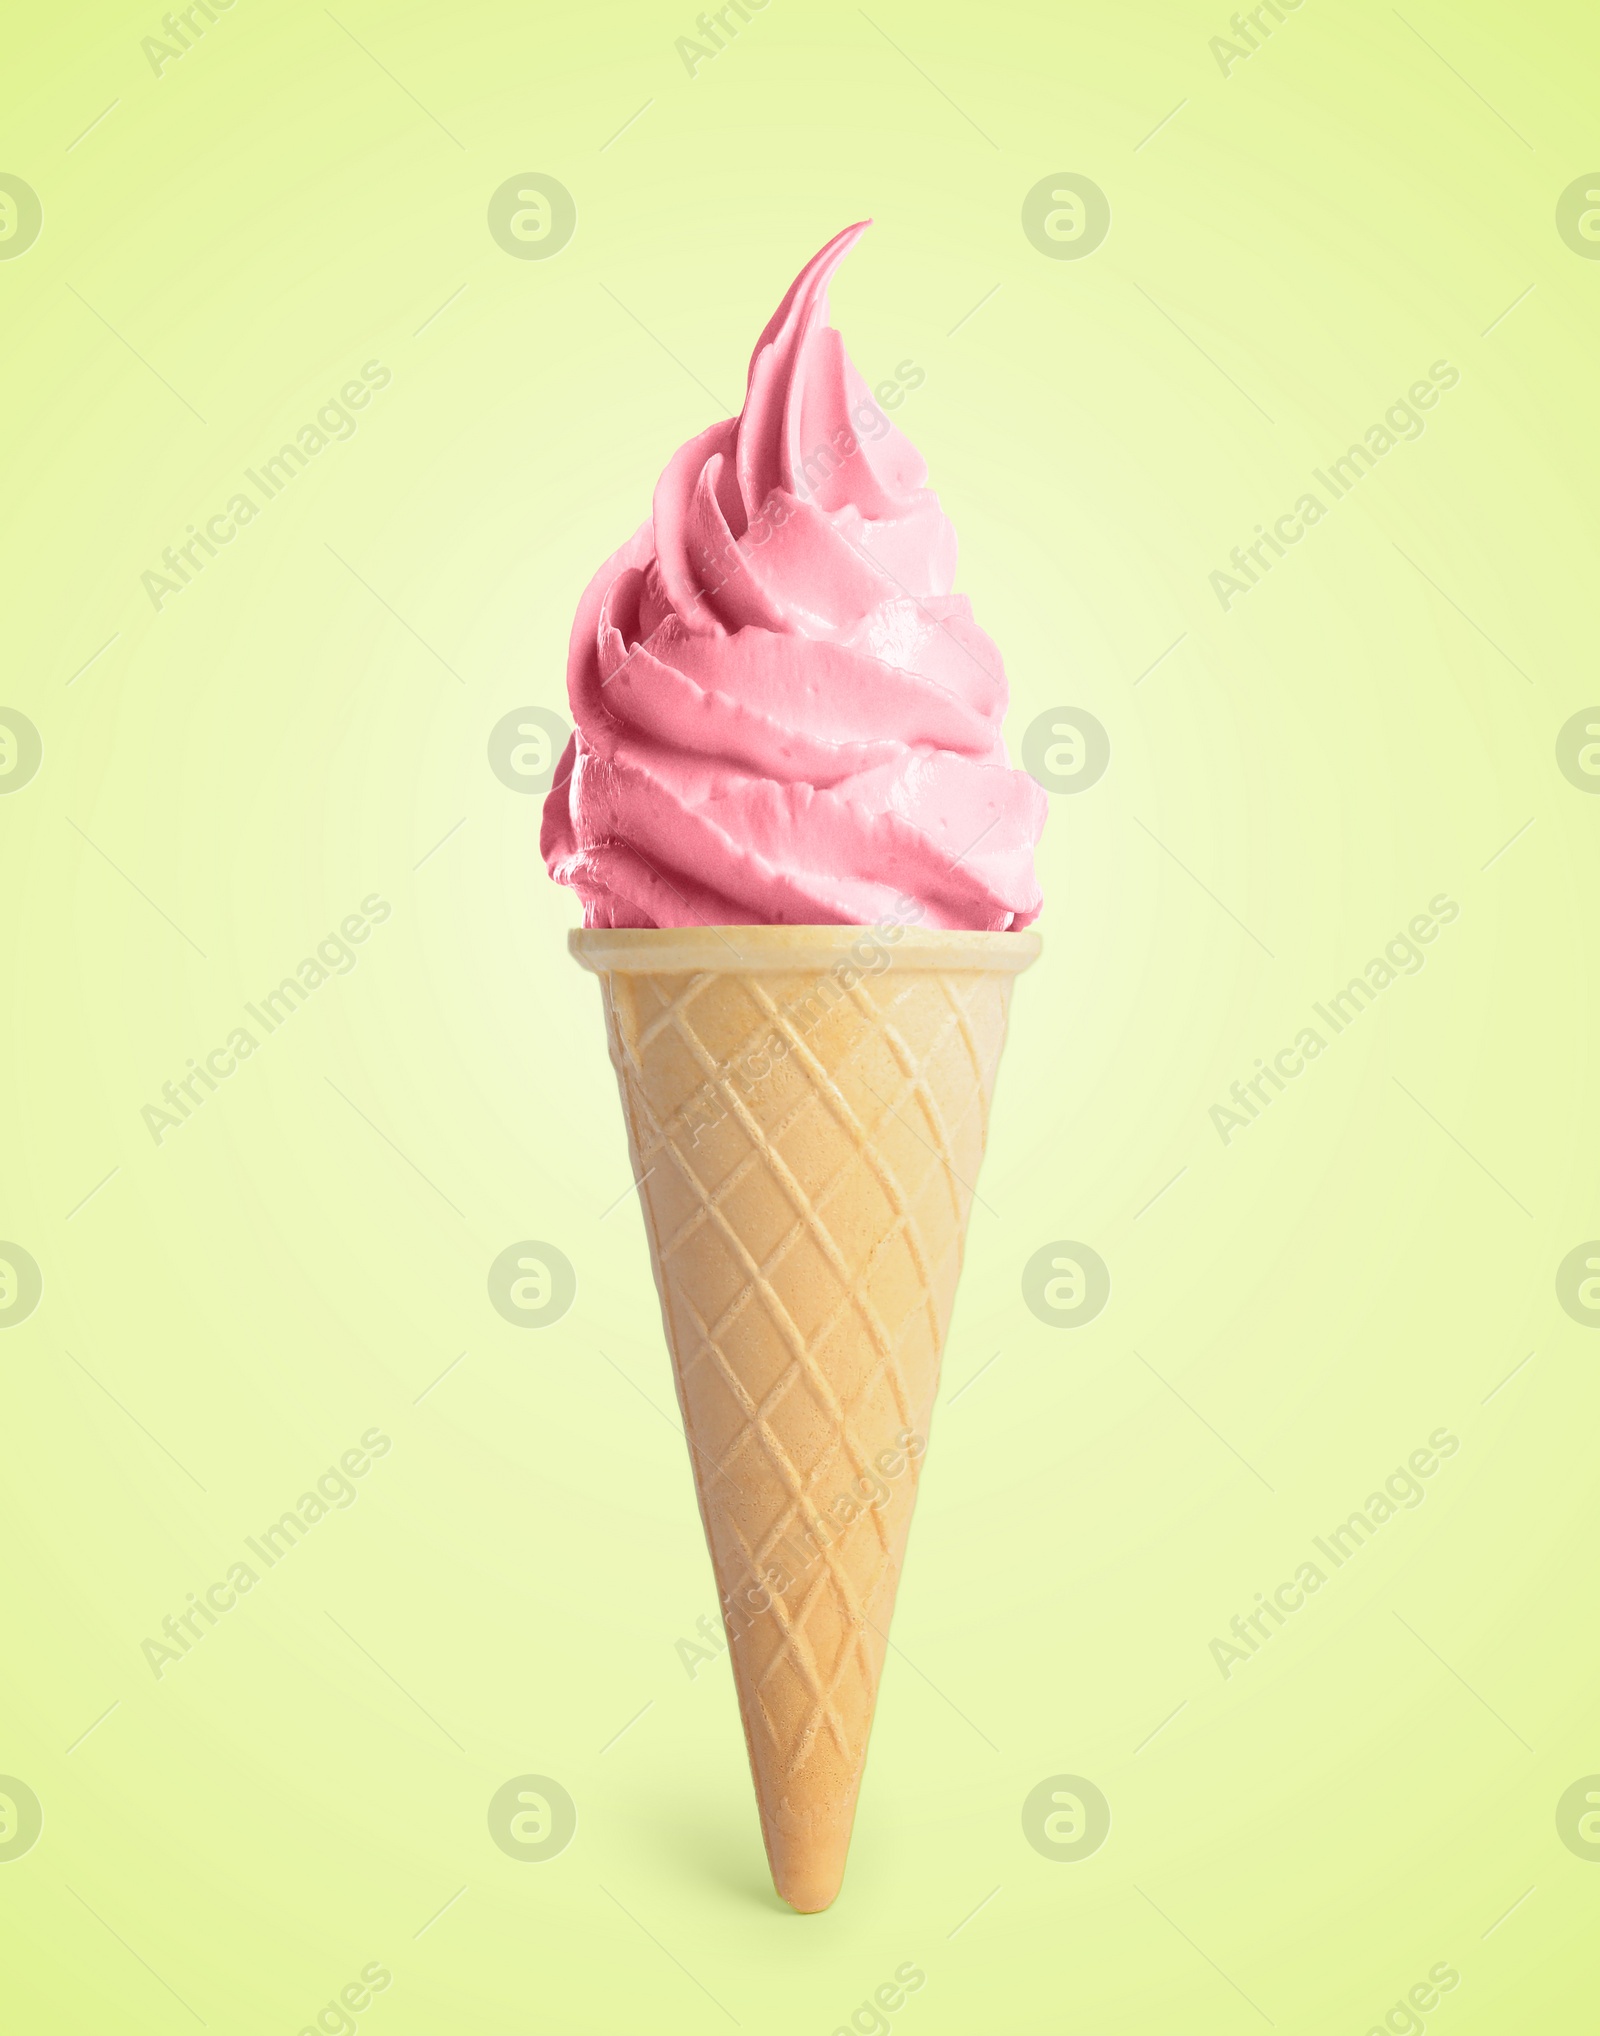 Image of Delicious soft serve berry ice cream in crispy cone on pastel green yellow background